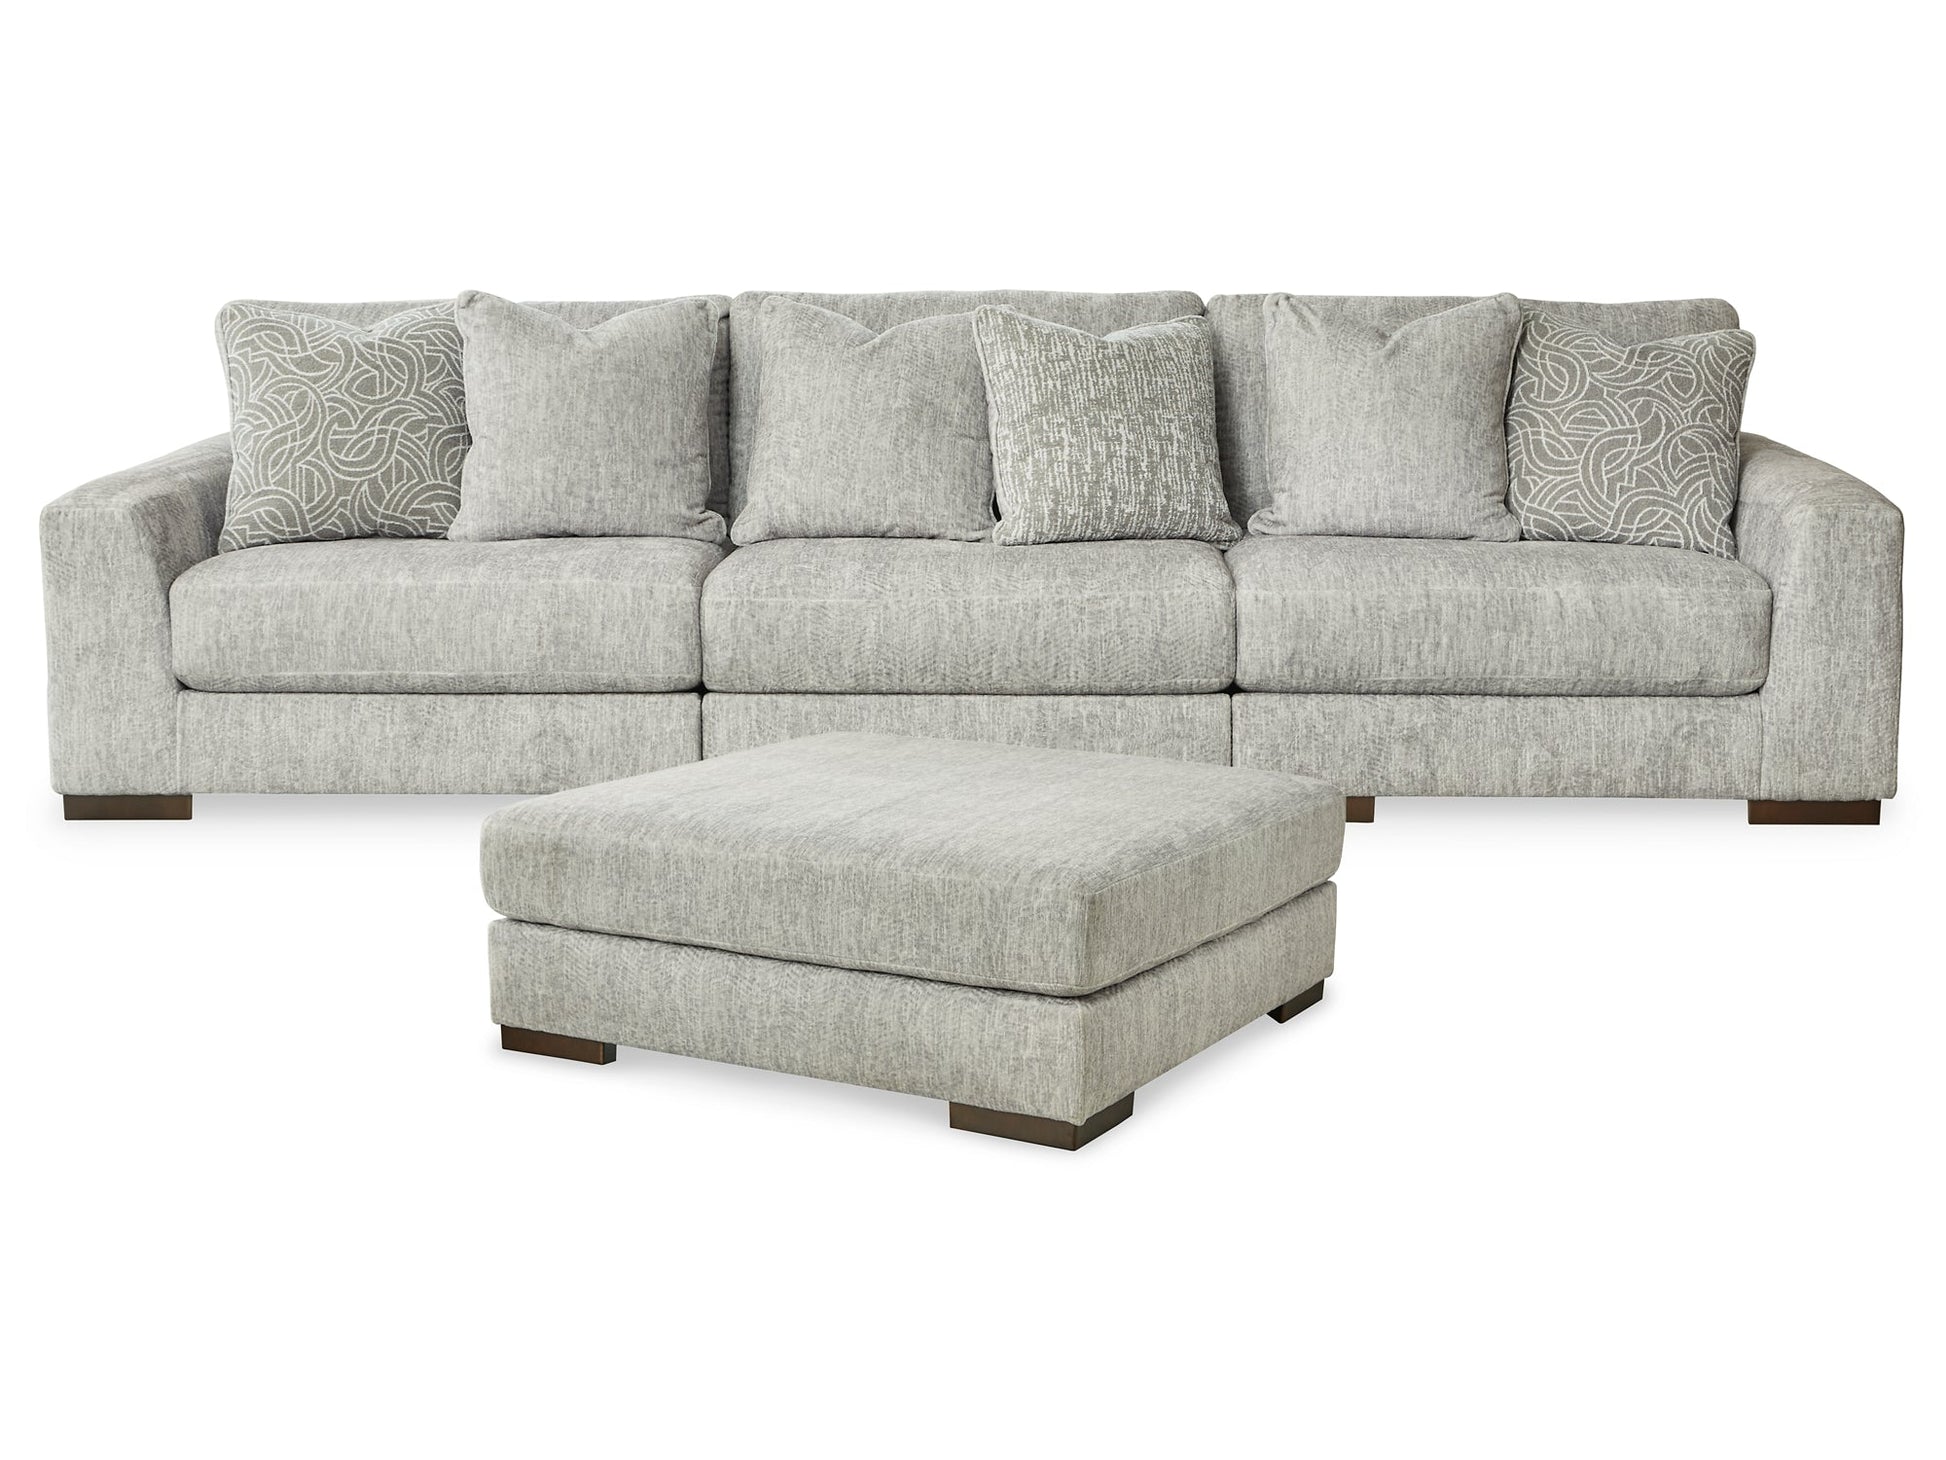 Regent Park 3-Piece Sectional with Ottoman at Cloud 9 Mattress & Furniture furniture, home furnishing, home decor